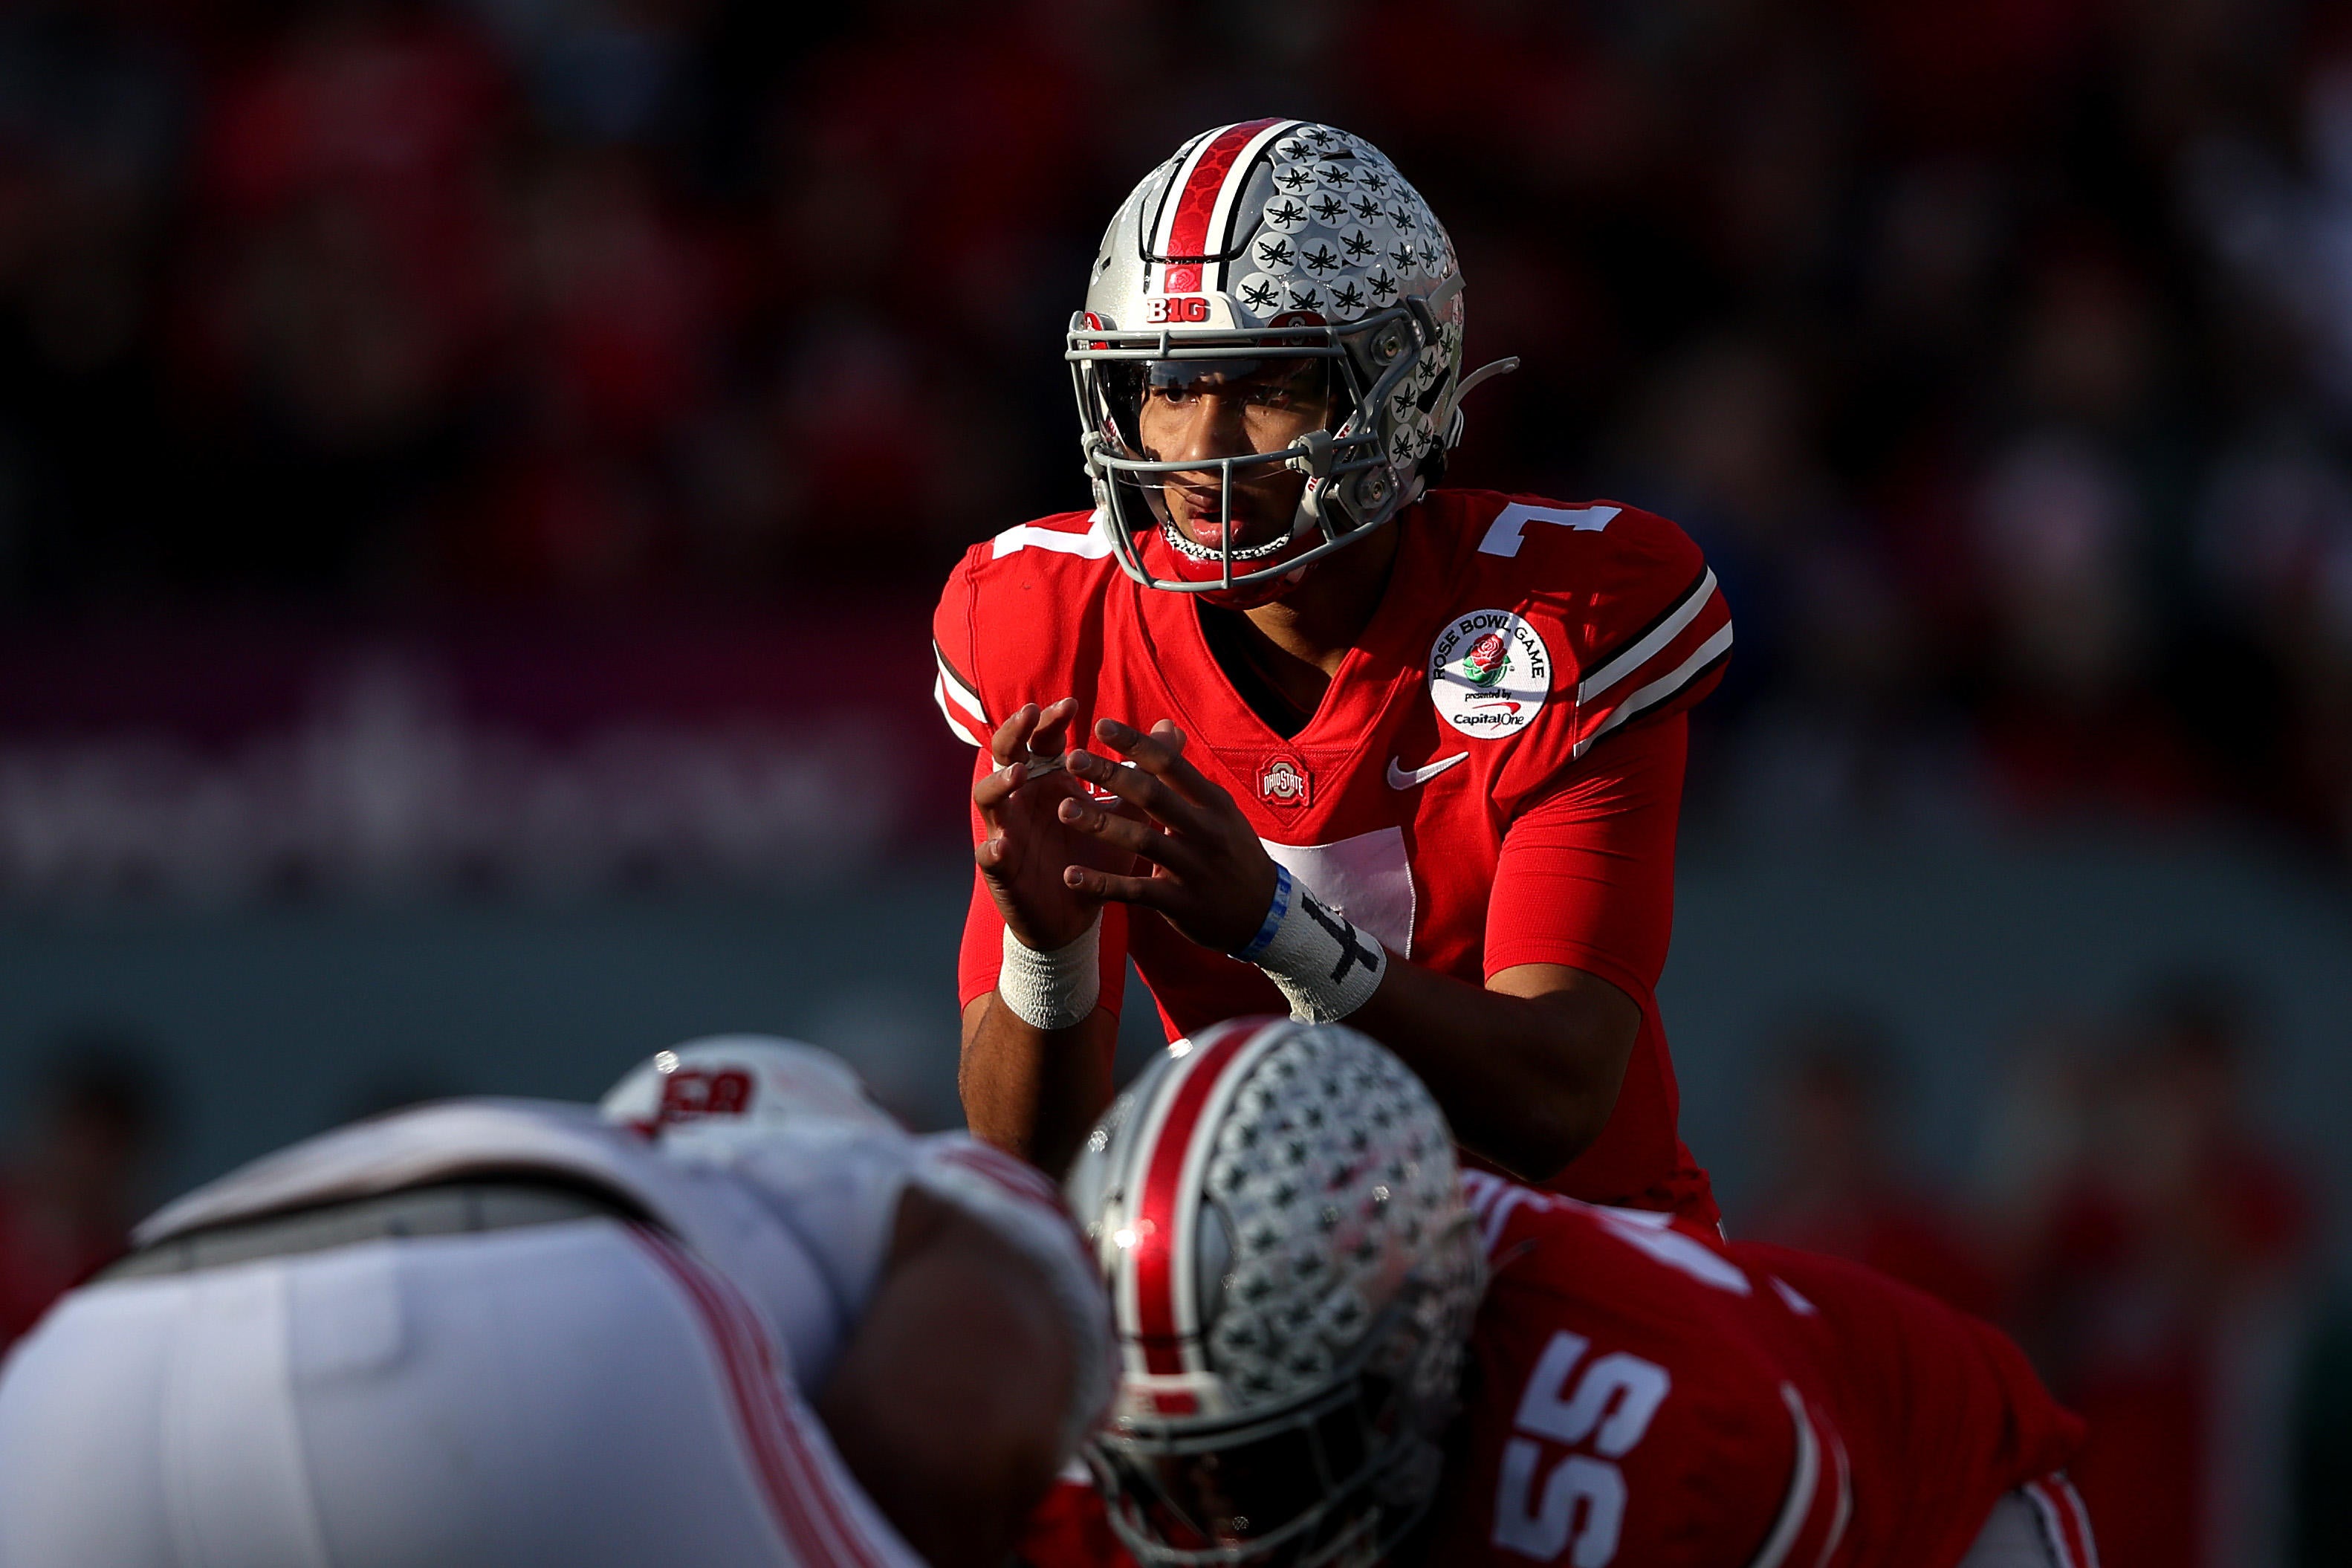 Rose Bowl Game presented by Capital One Venture X – Ohio State v Utah